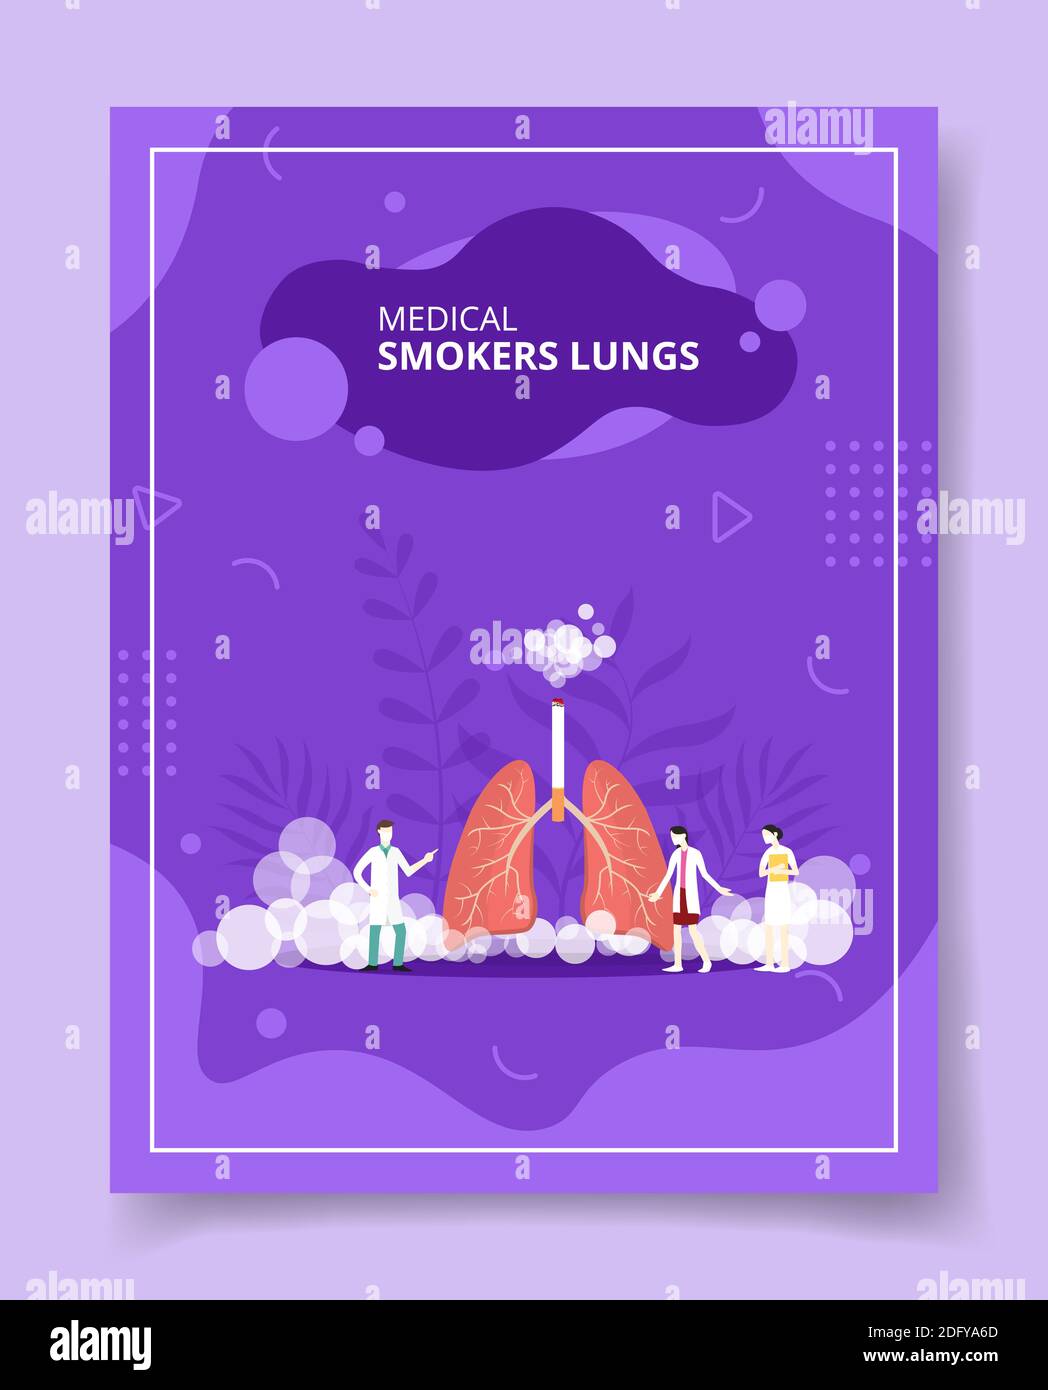 medical smokers lung people scientist standing front lung anatomy organ with smoke for template of banners, flyer, books cover, magazines with liquid Stock Photo